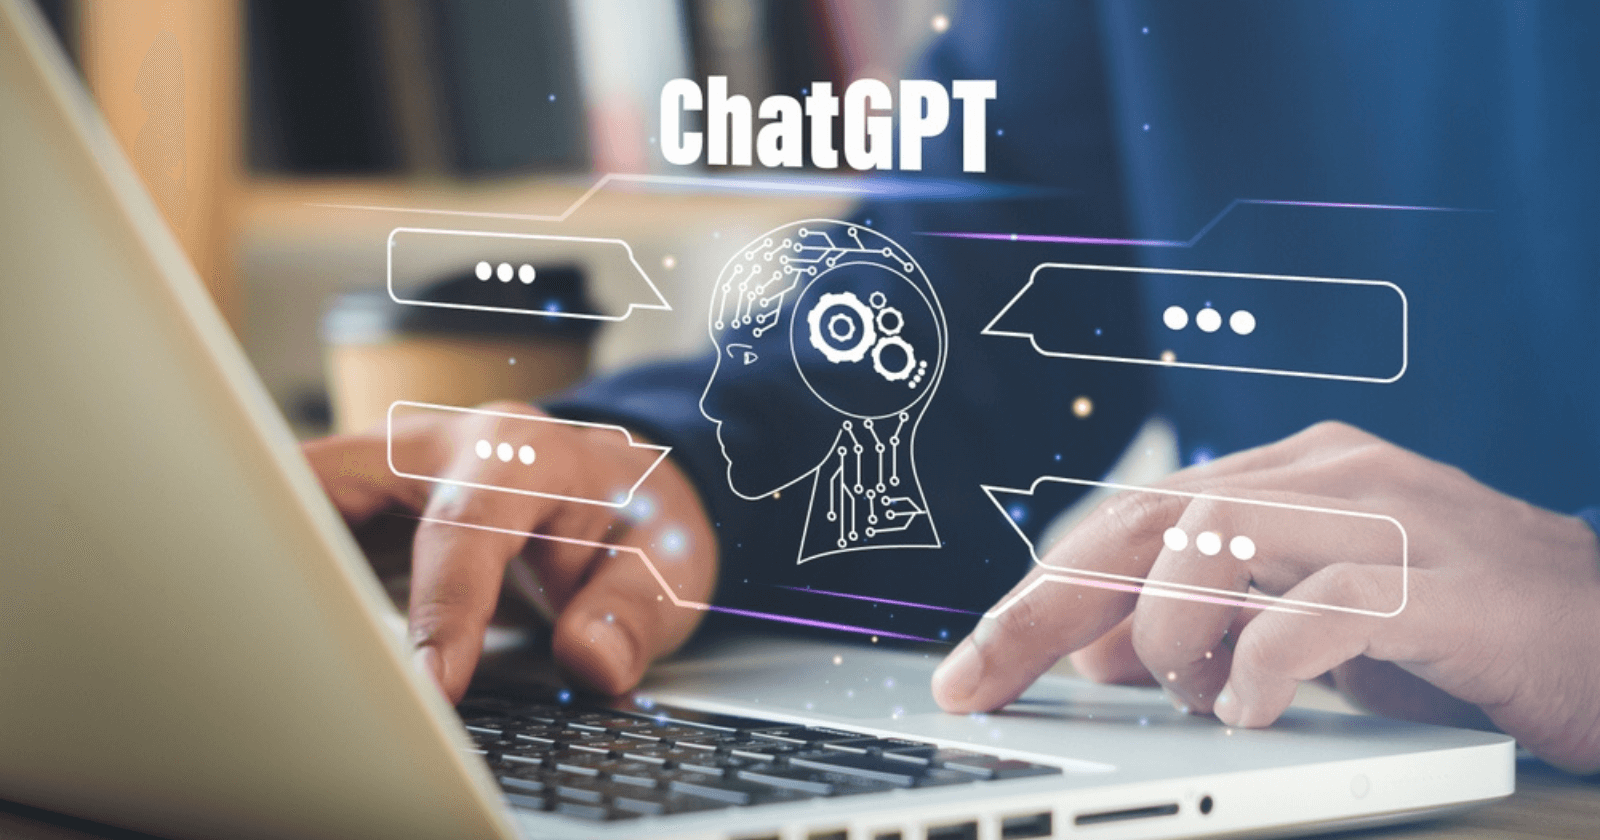 How ChatGPT Can Be Useful for Excel Users